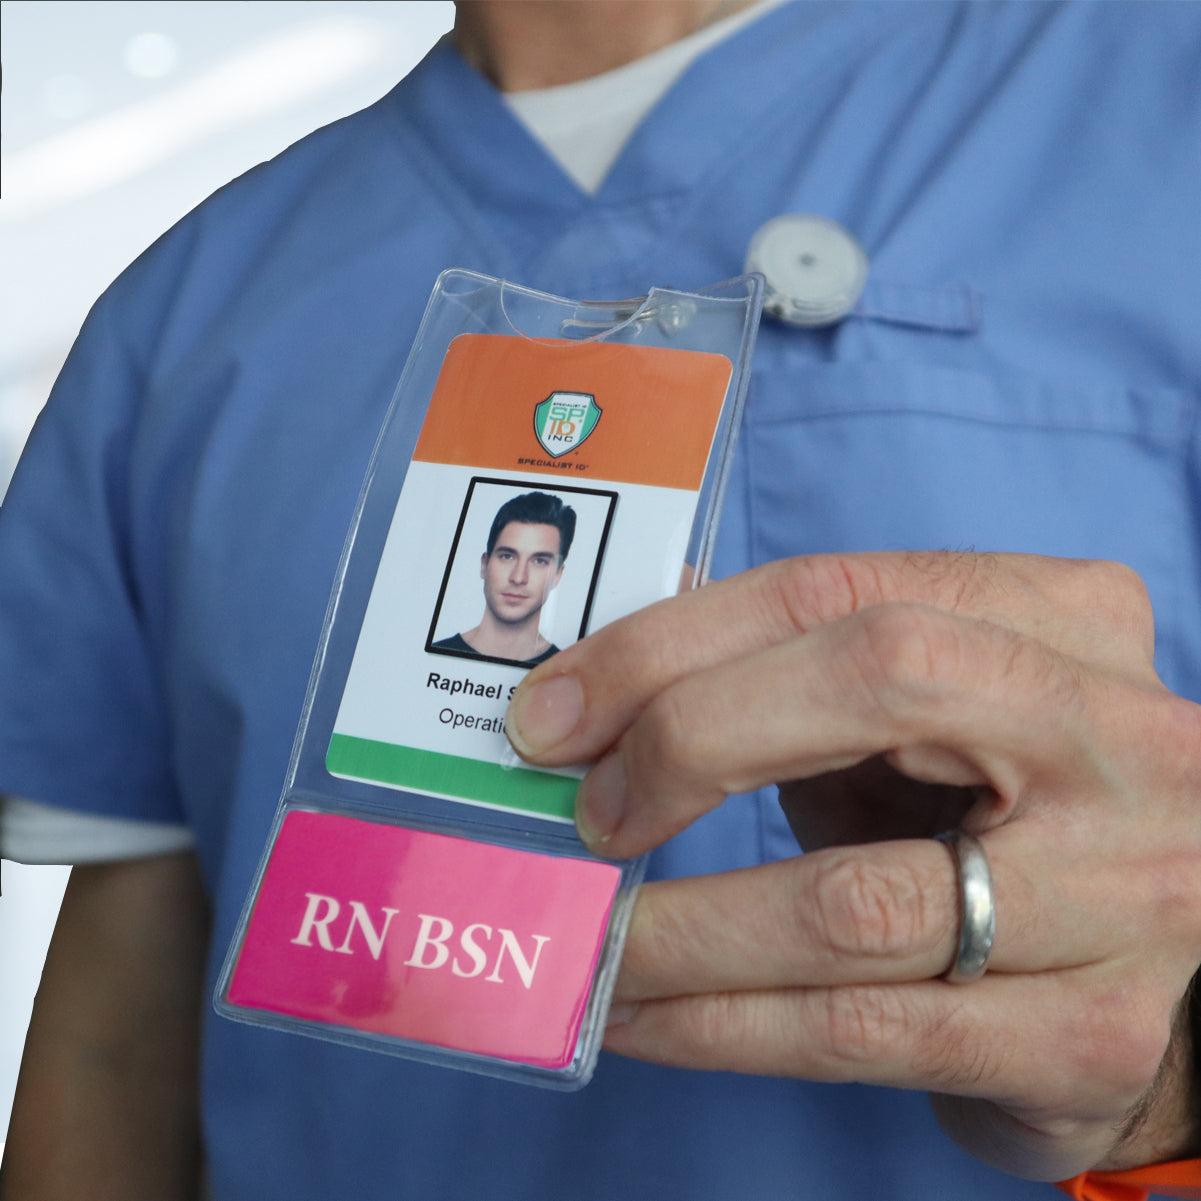 RN BSN BadgeBottom ID Card and RN BSN Badge Buddy all in one for healthcare professionals